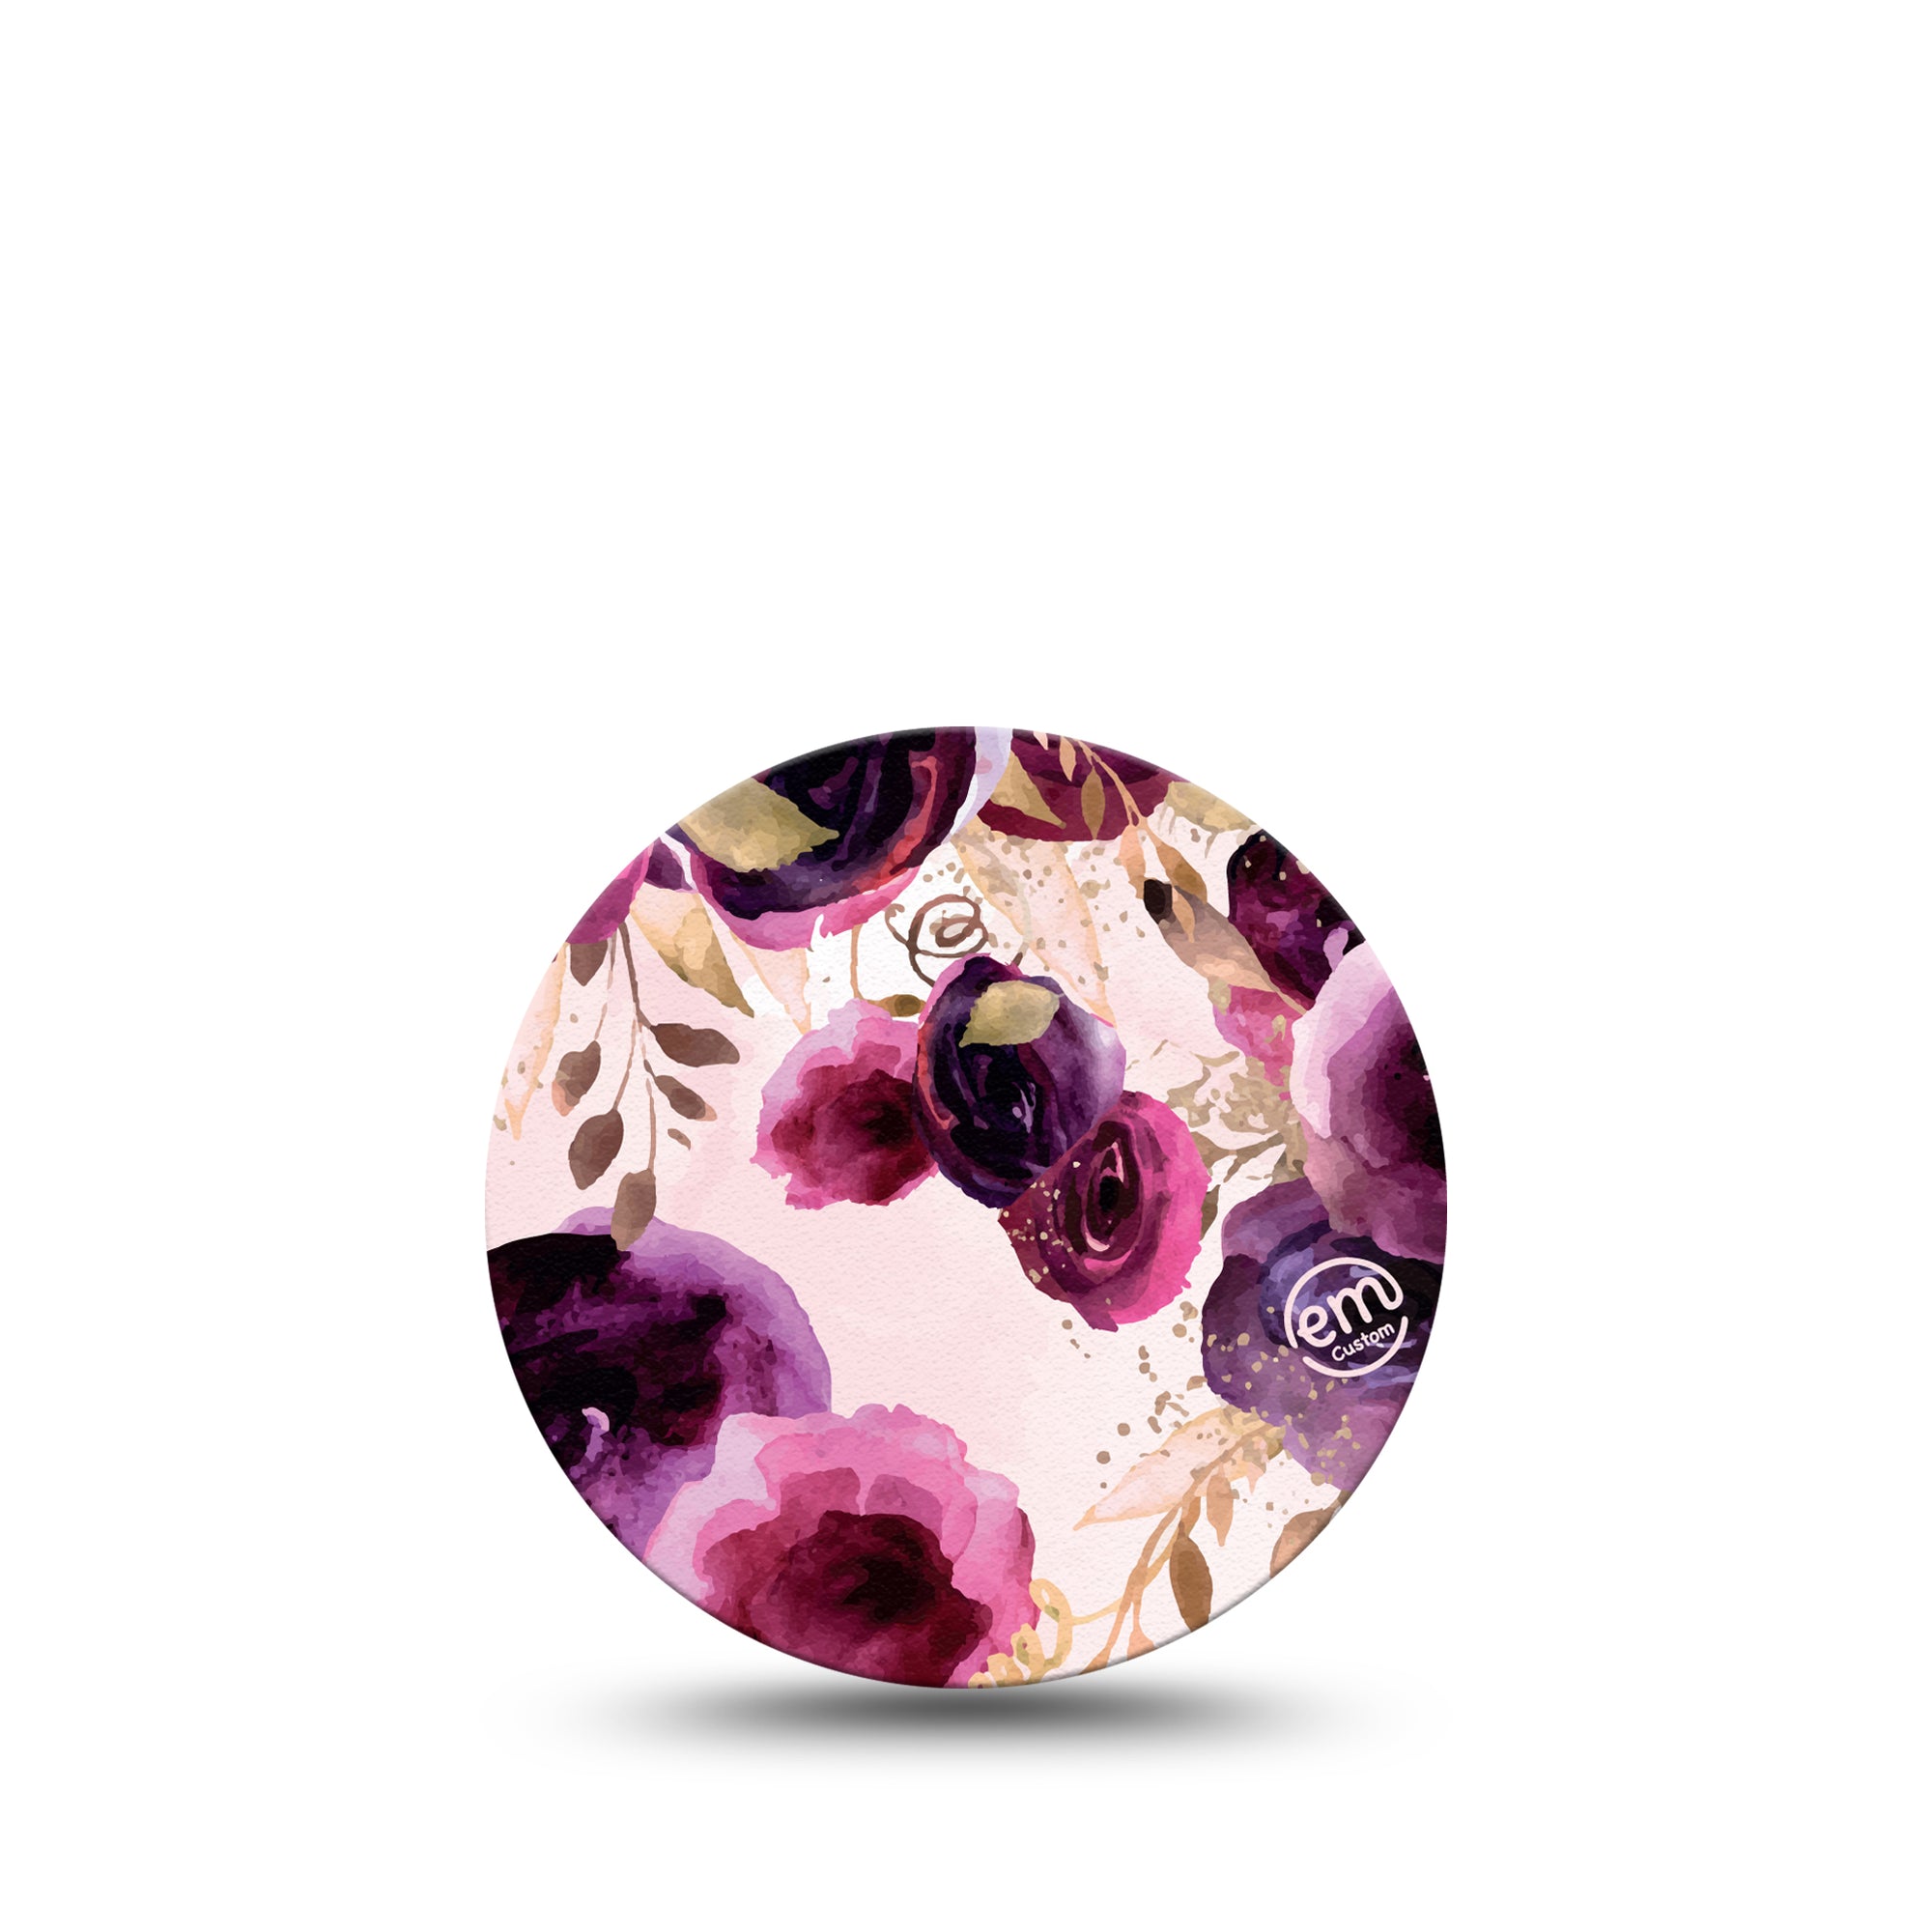 ExpressionMed Purple Bouquet Libre 3 Overpatch, Single, Purple Floral Themed, CGM Adhesive Tape Design